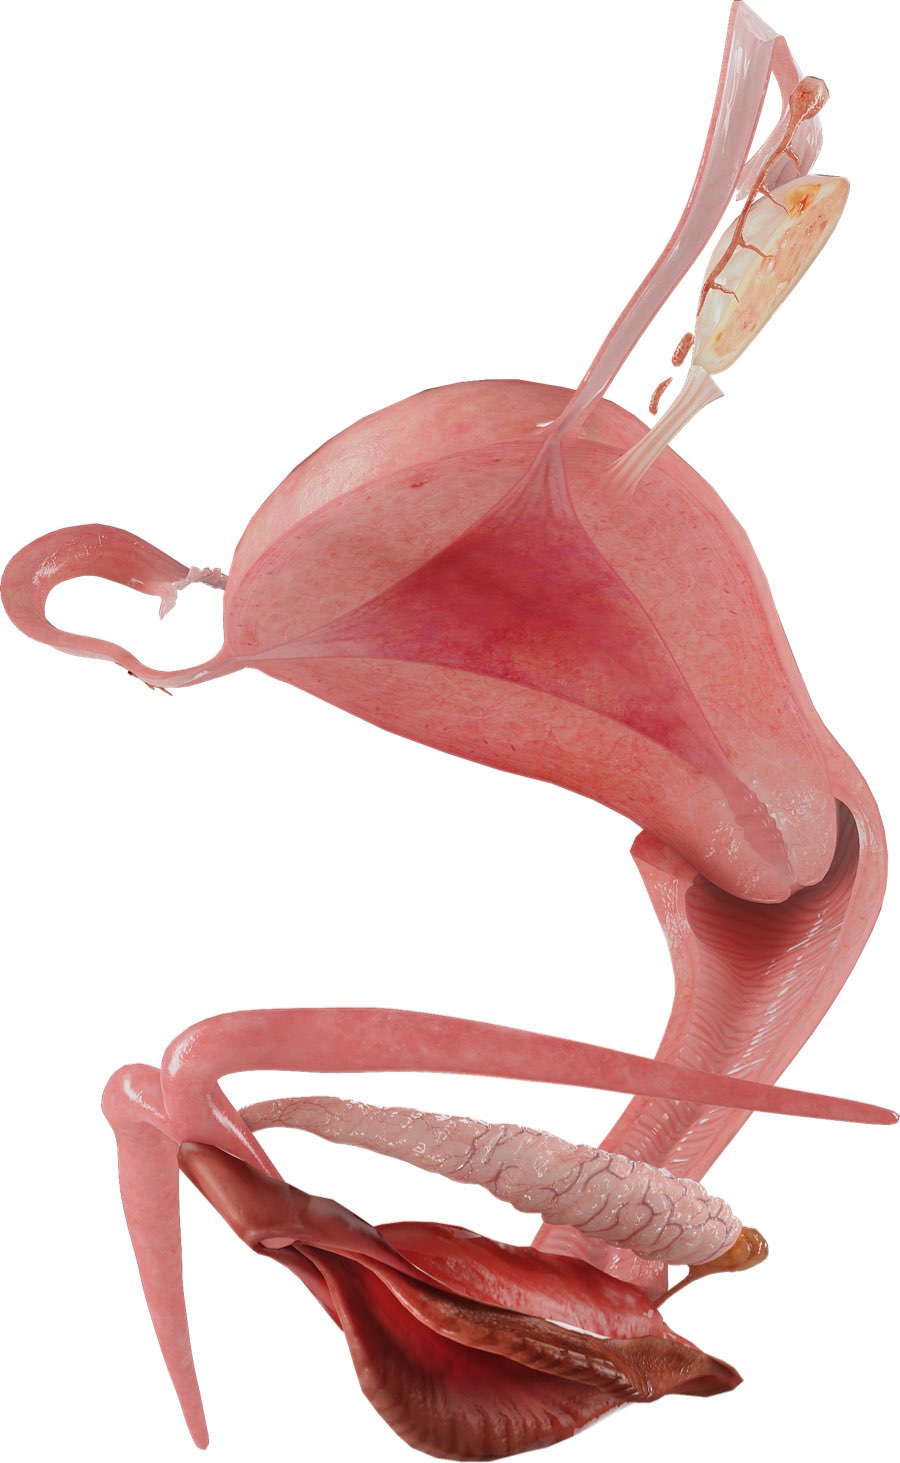 Interior reproductive organs of the female model in Complete Anatomy